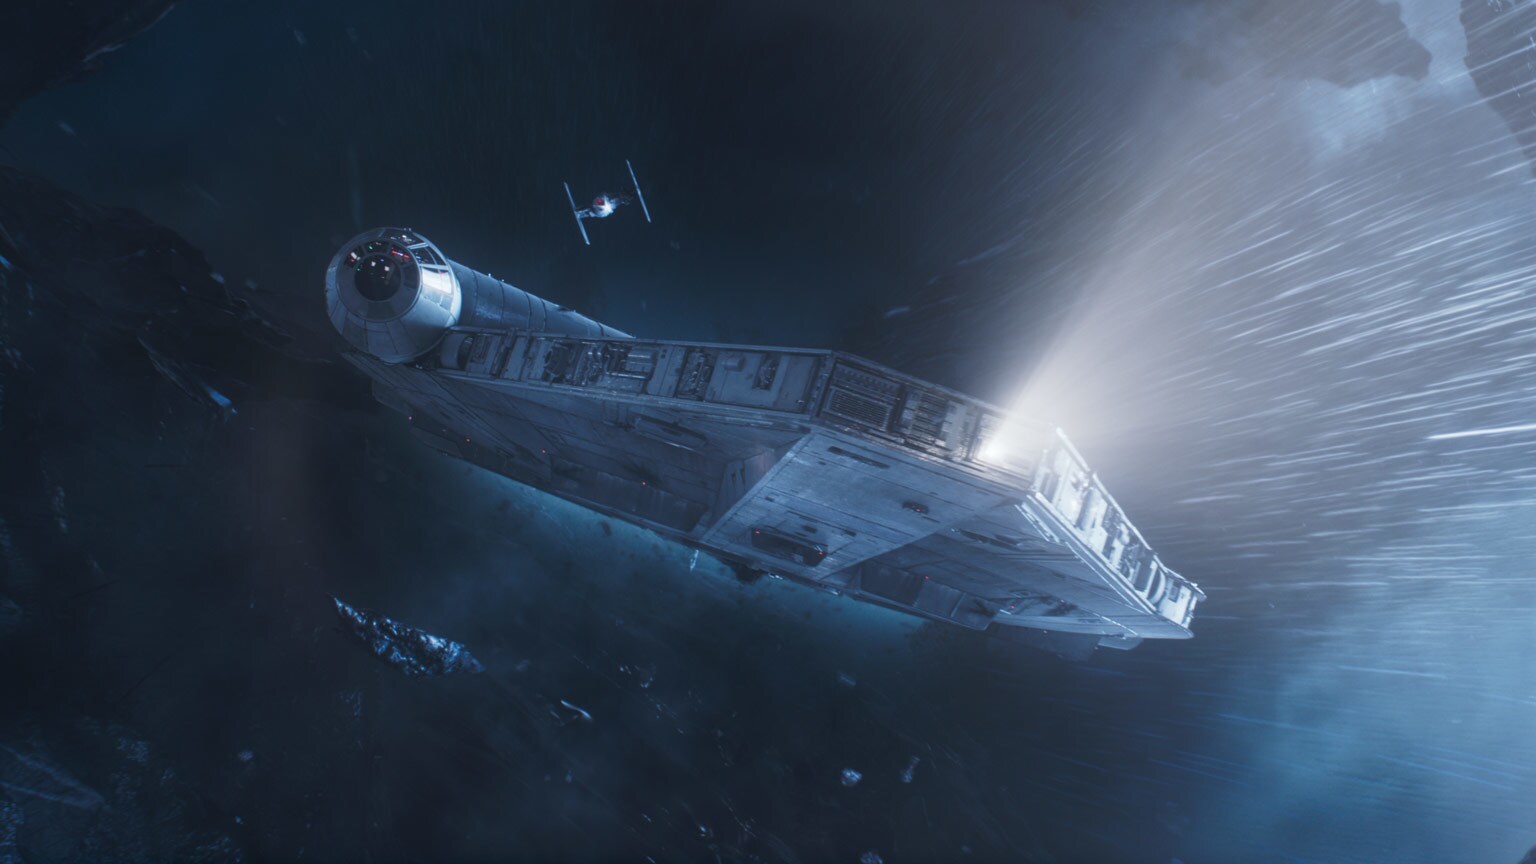 Ships of the Galaxy: The Millennium Falcon